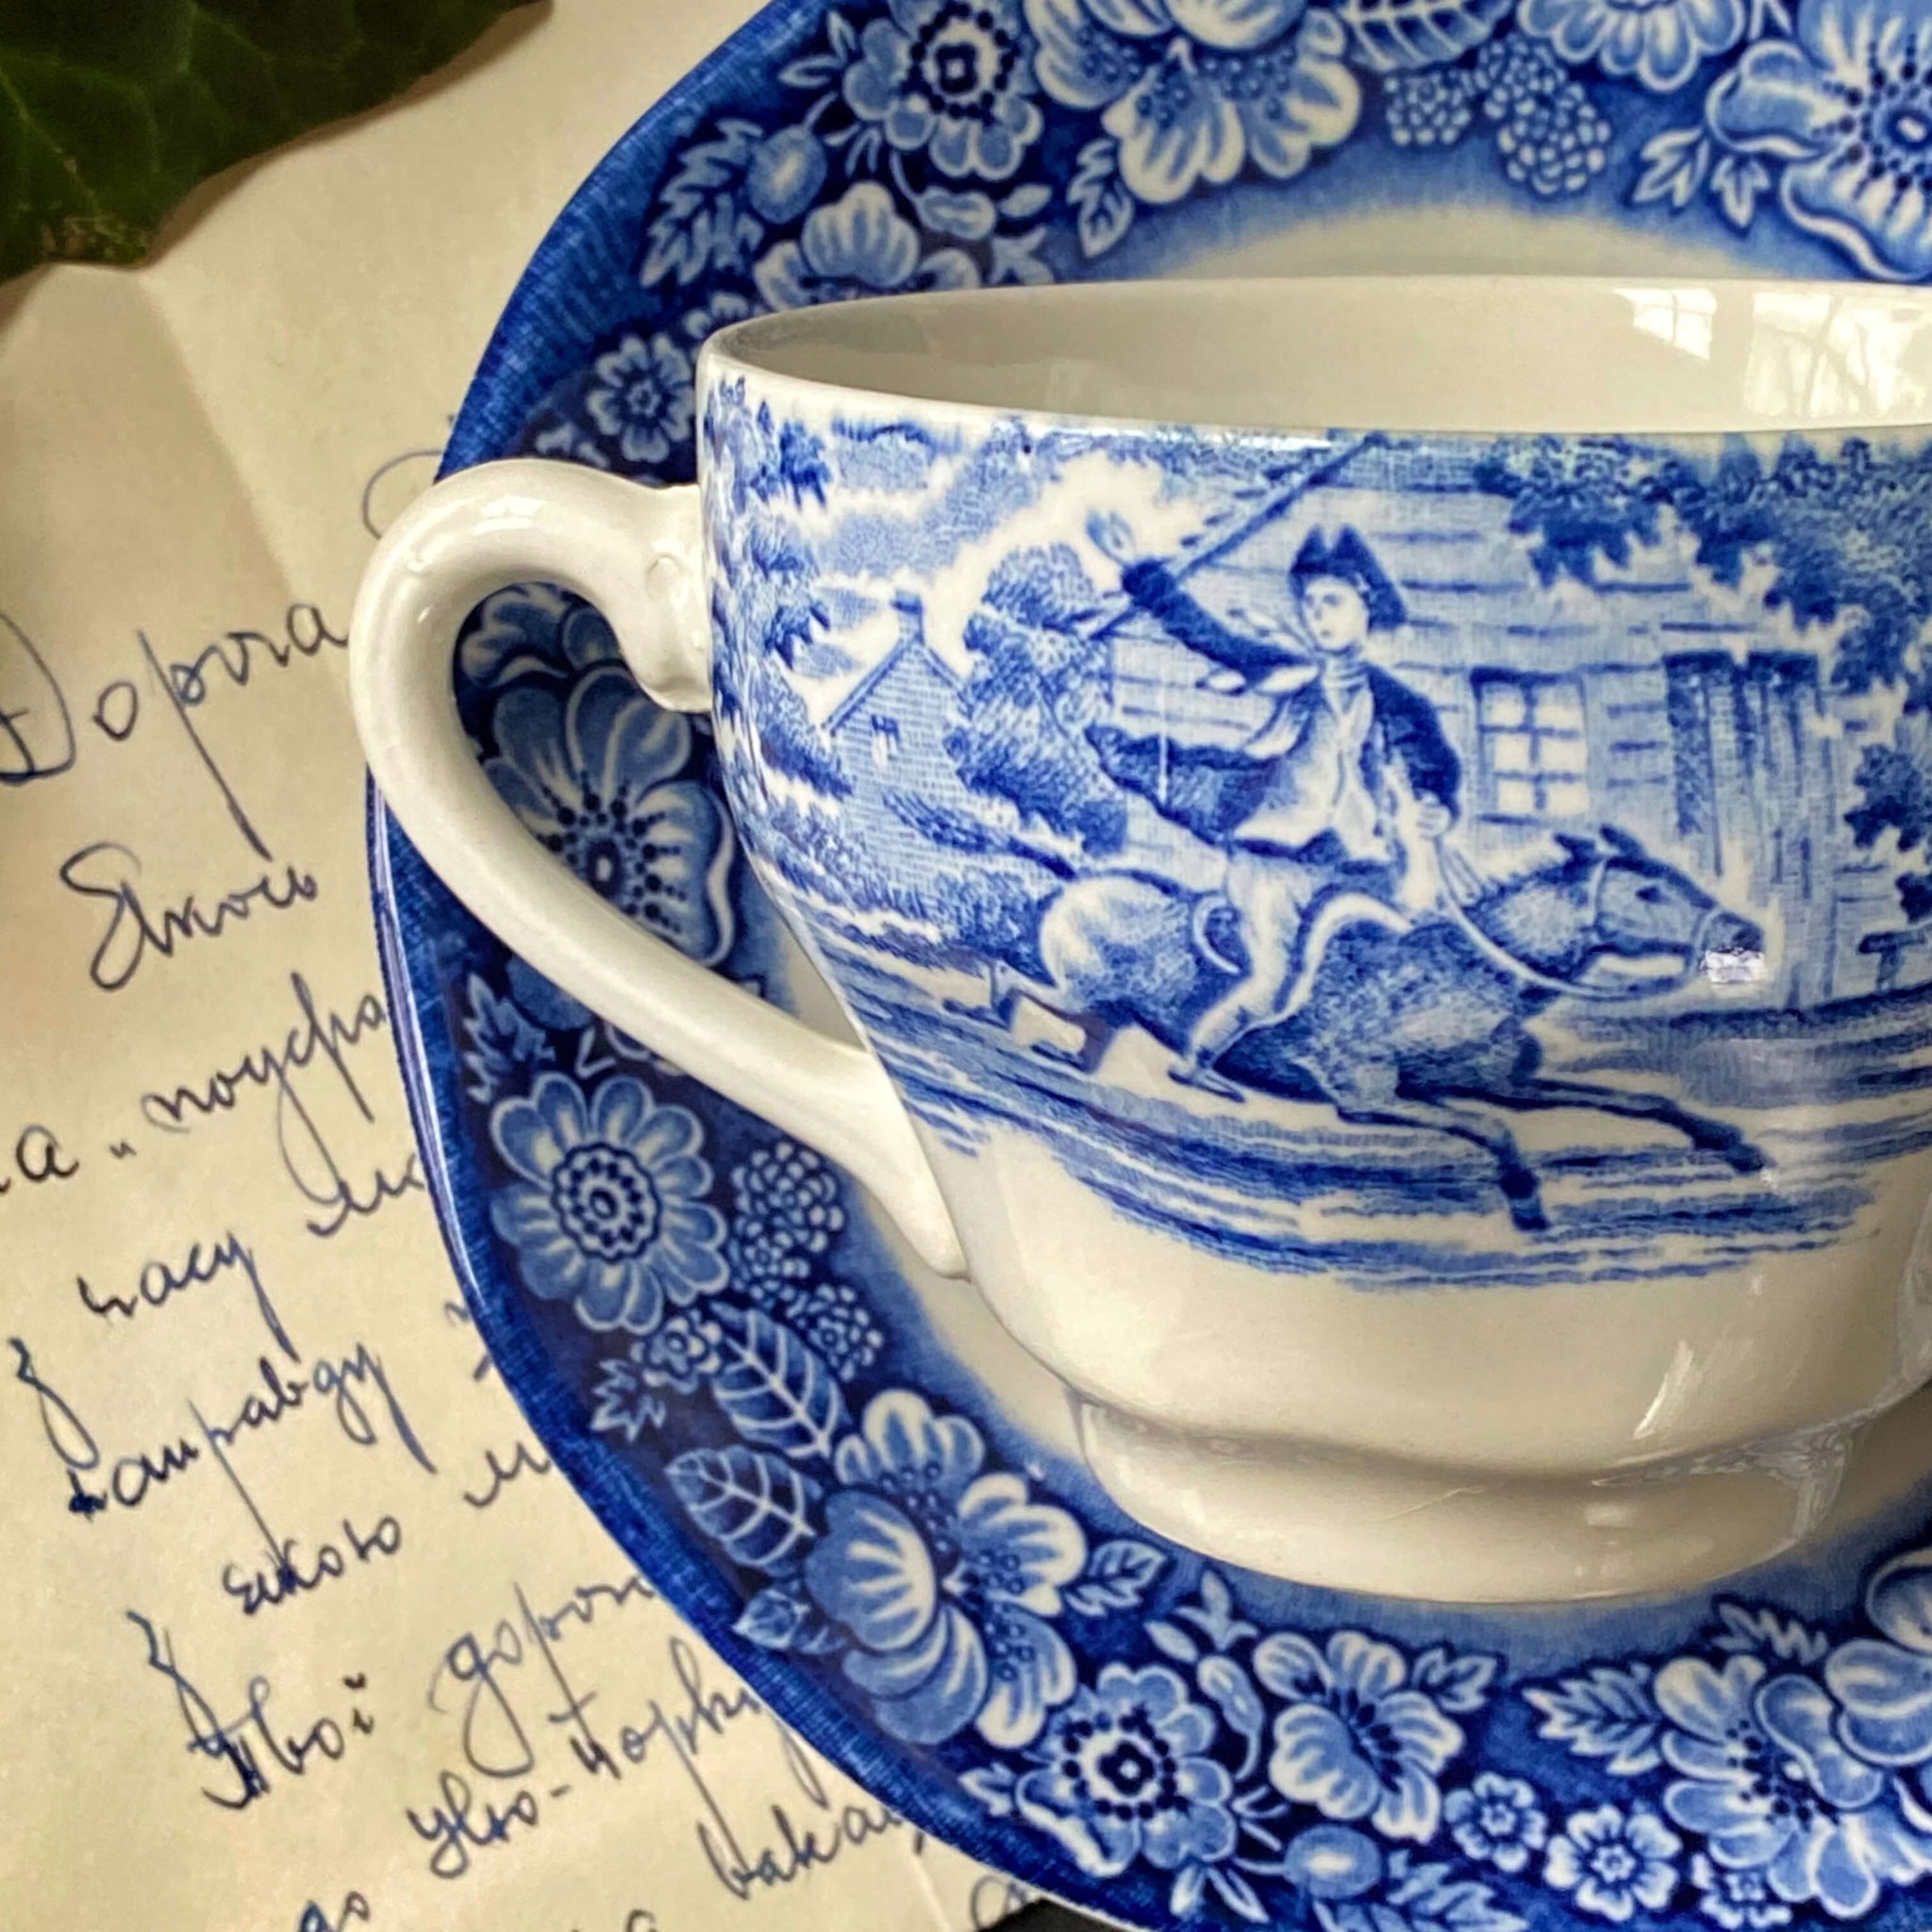 Vintage 1970s Blue & White Cup and Saucer - Liberty Blue by Enoch Wedgwood & Co Staffordshire England circa 1975-1981